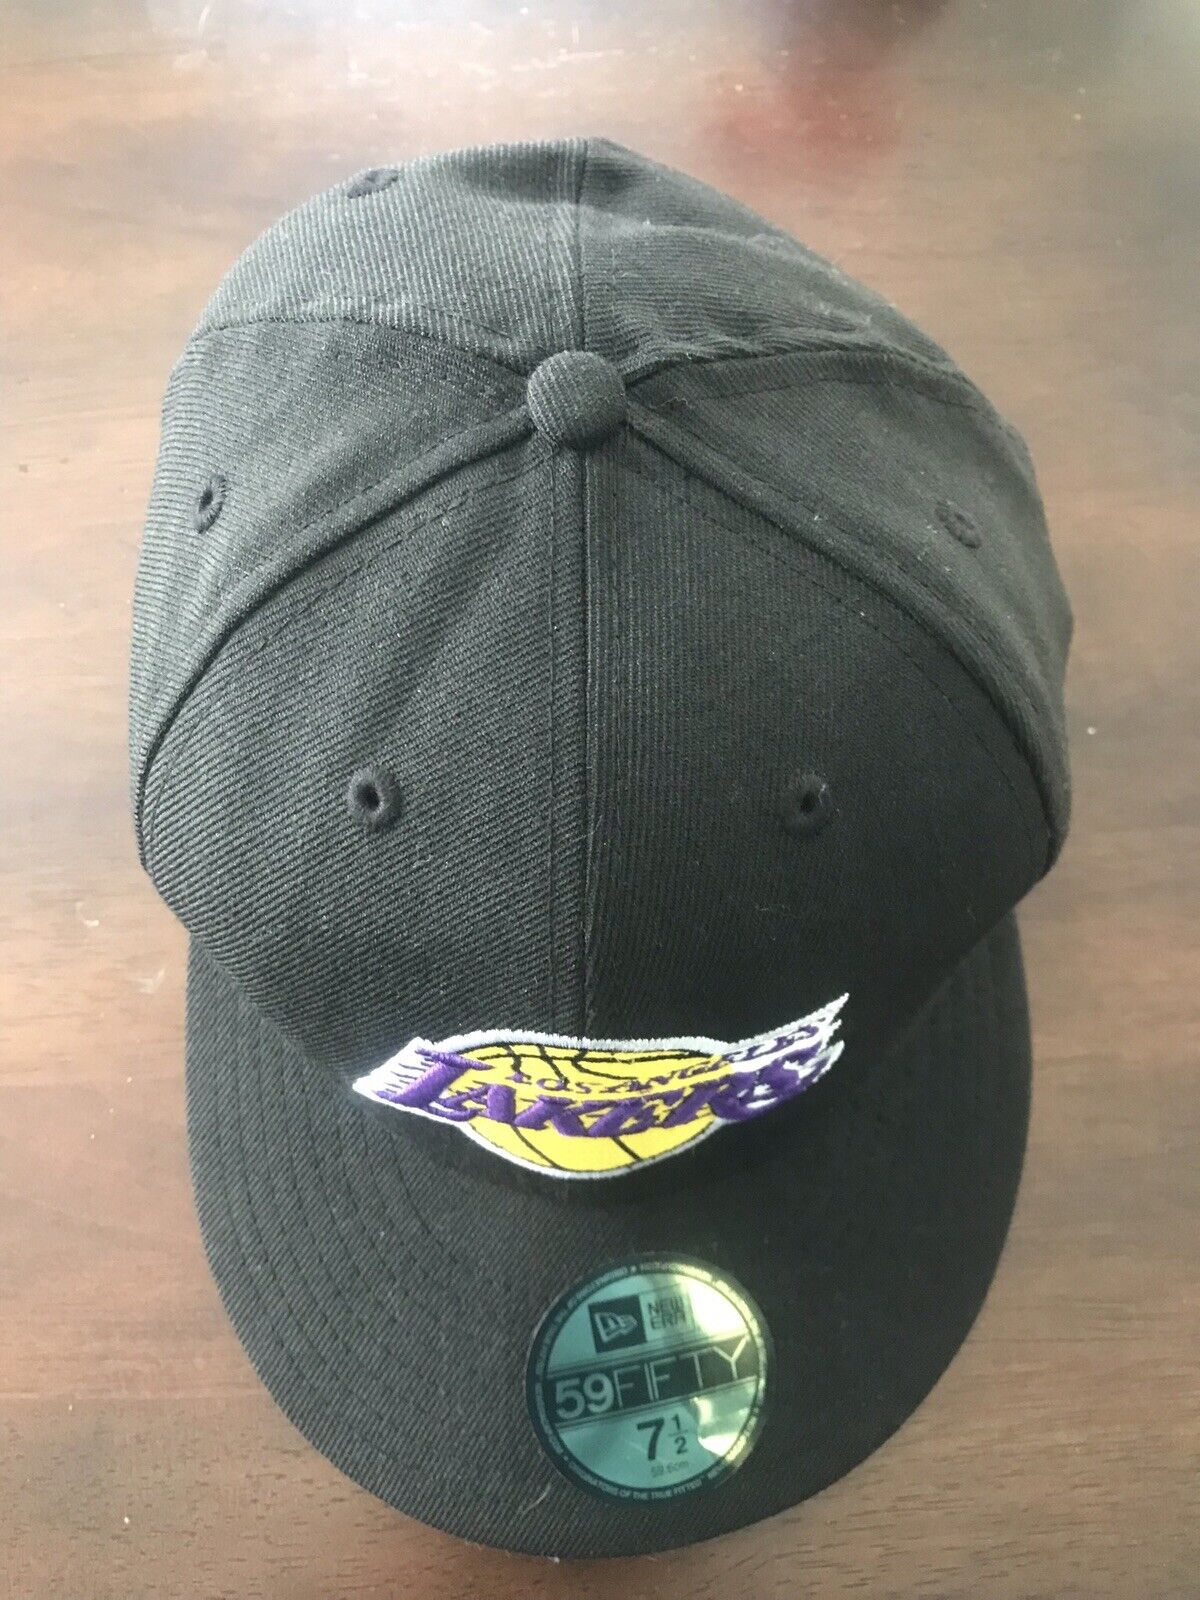 100% AUTHENTIC NEW ERA 59FIFTY NBA L. A. LAKERS FITTED HAT (7 1/2)